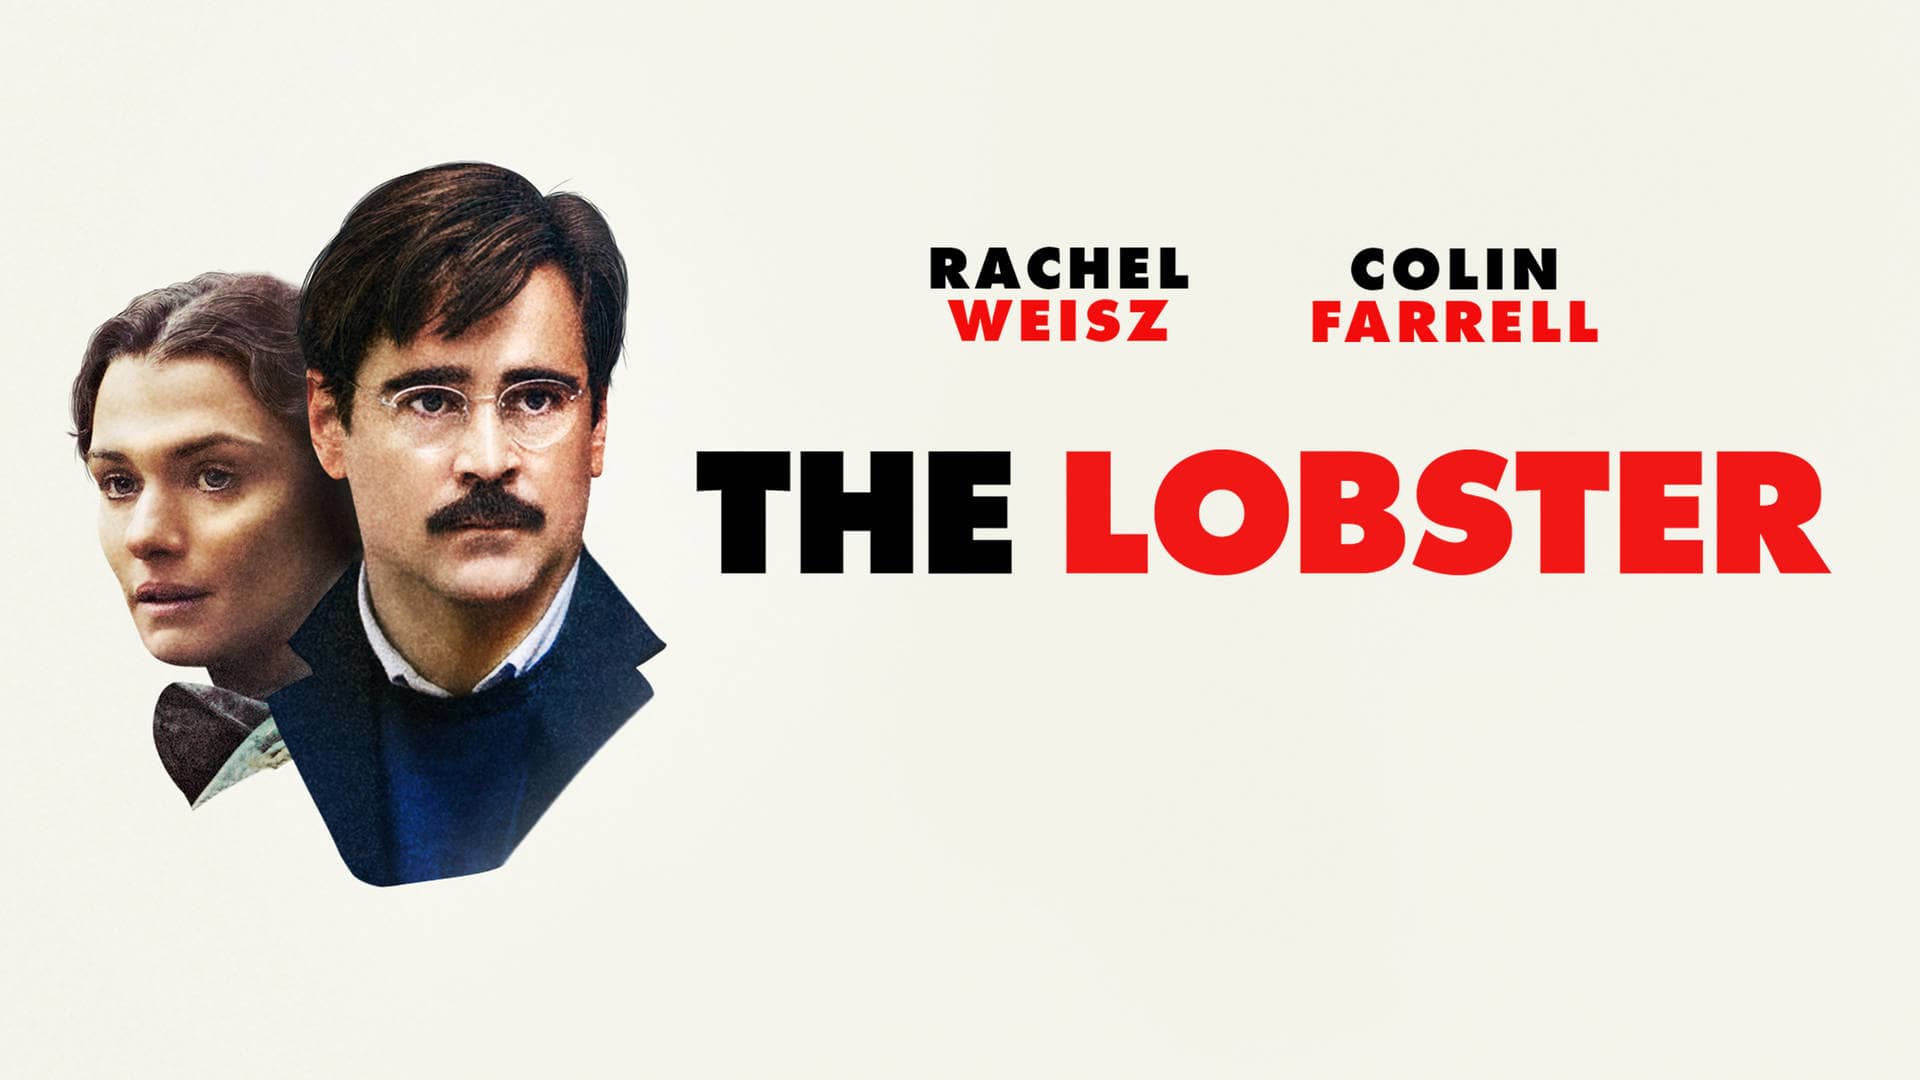 Title art for dystopian movie The Lobster